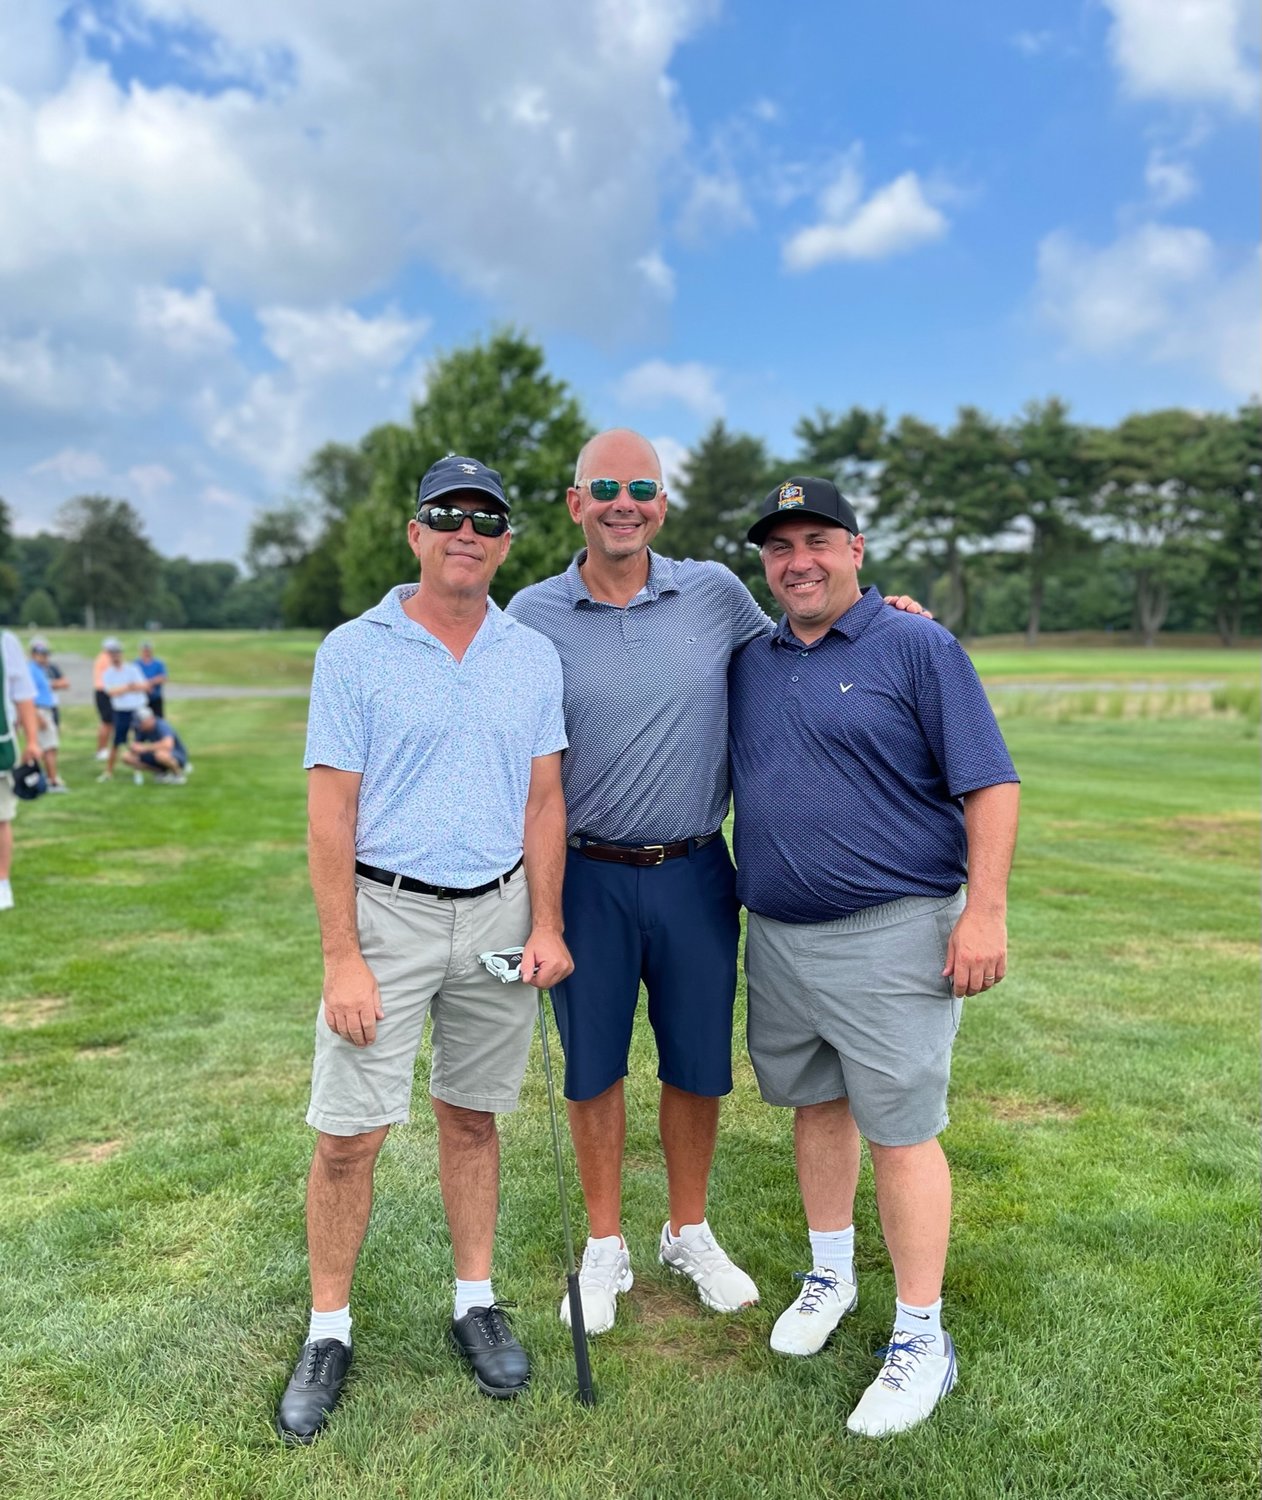 Jamie Weil, left, Dave Ayres and Hugo Lau enjoyed the opportunity to play some golf and support their community at the CASA Cares golf outing.